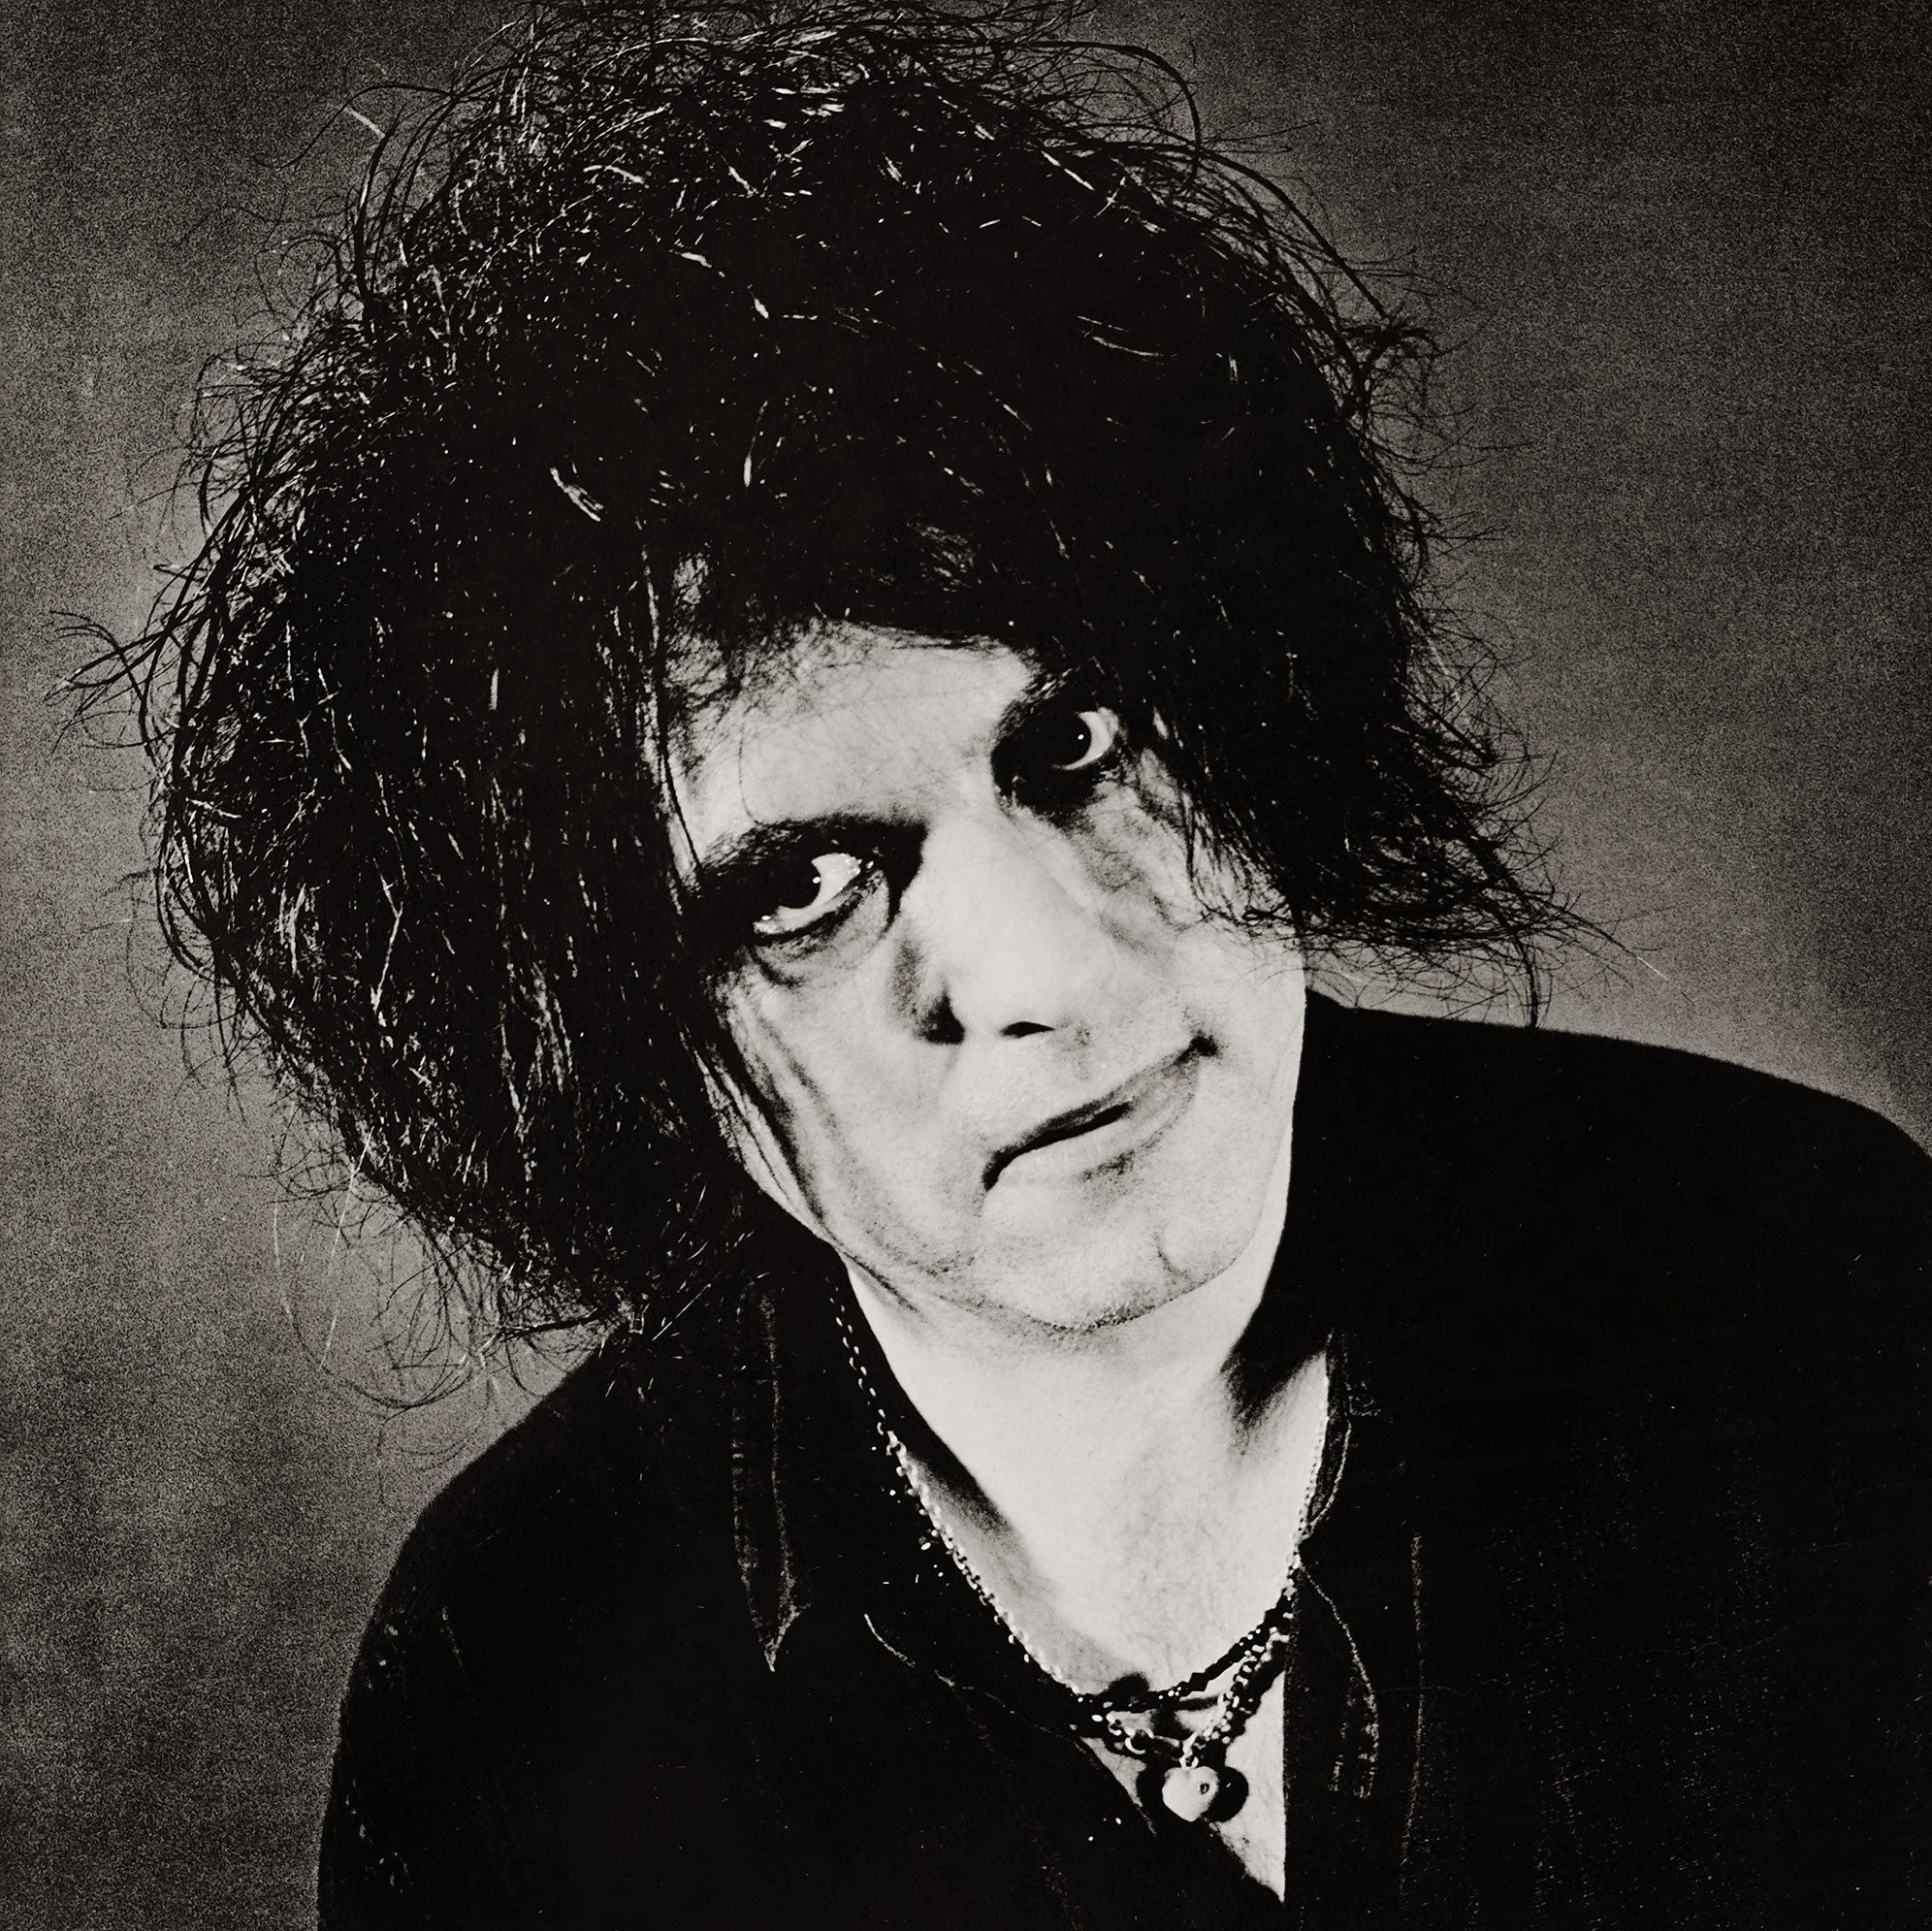 ROBERT SMITH / THE CURE